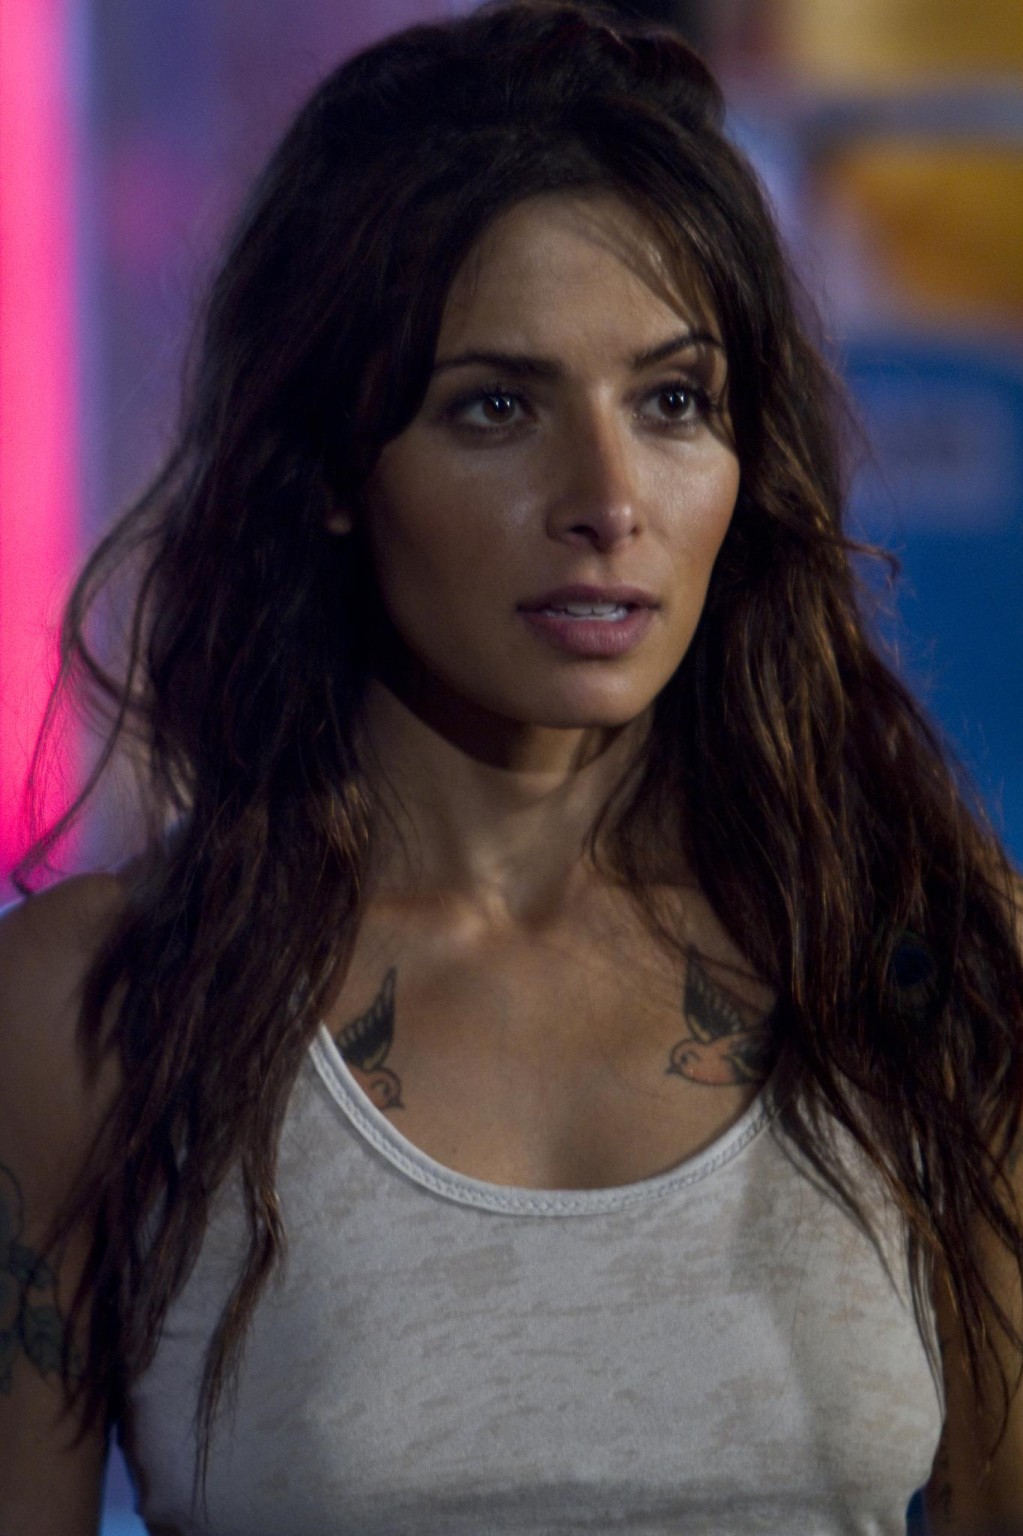 Sarah Shahi leaked nude pics with fake tattoos made during the Bullet in the Hea #75186720